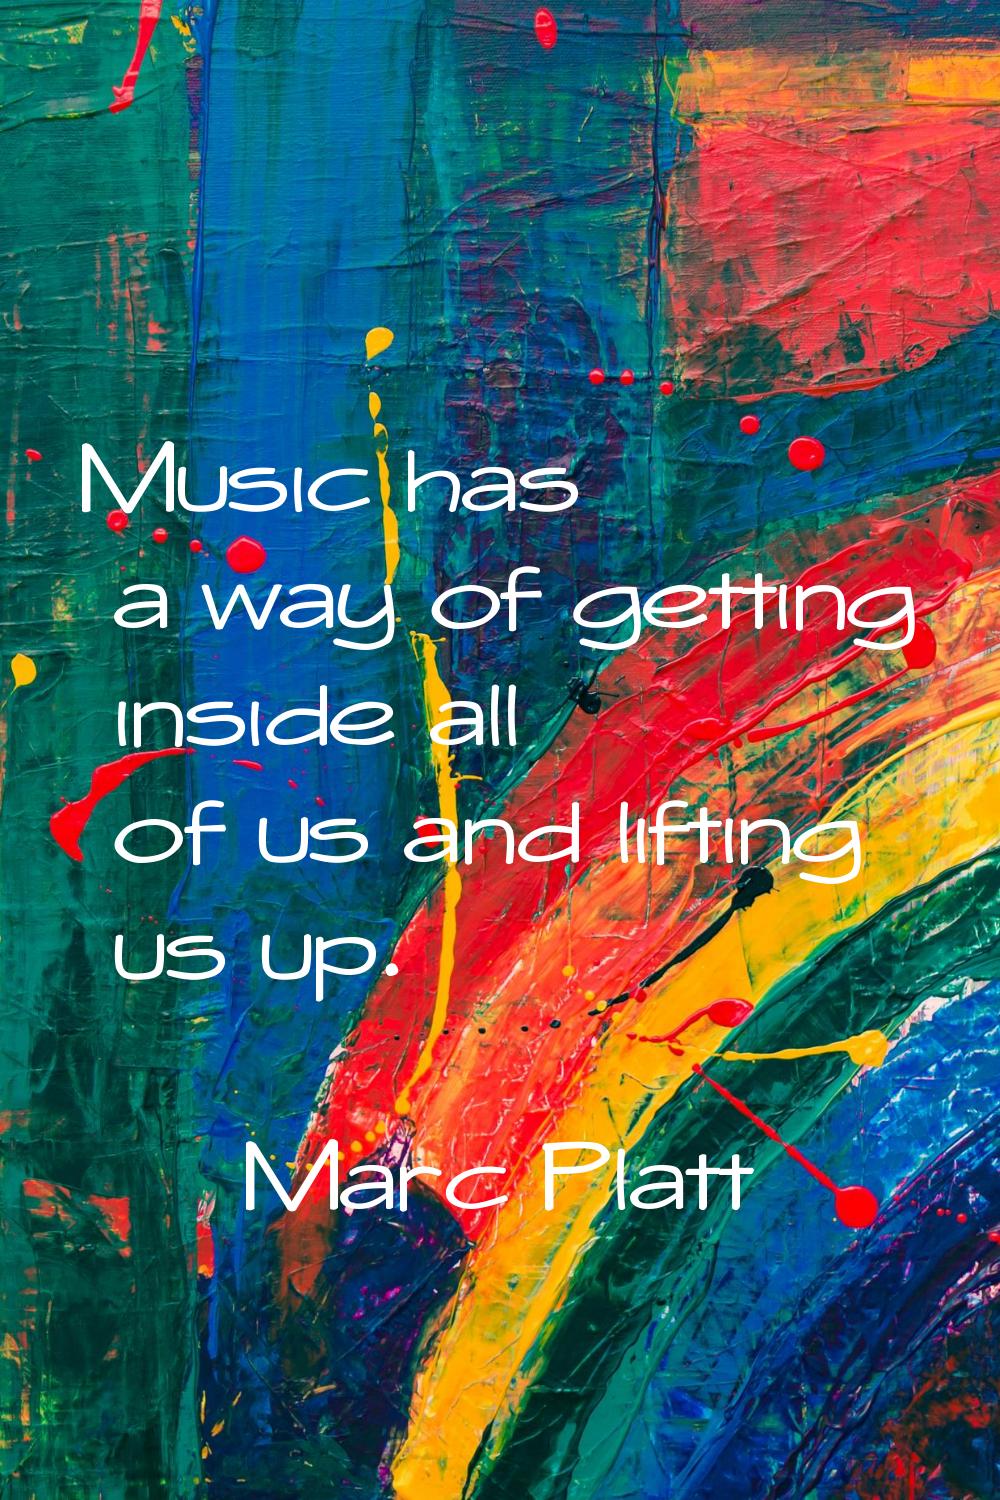 Music has a way of getting inside all of us and lifting us up.